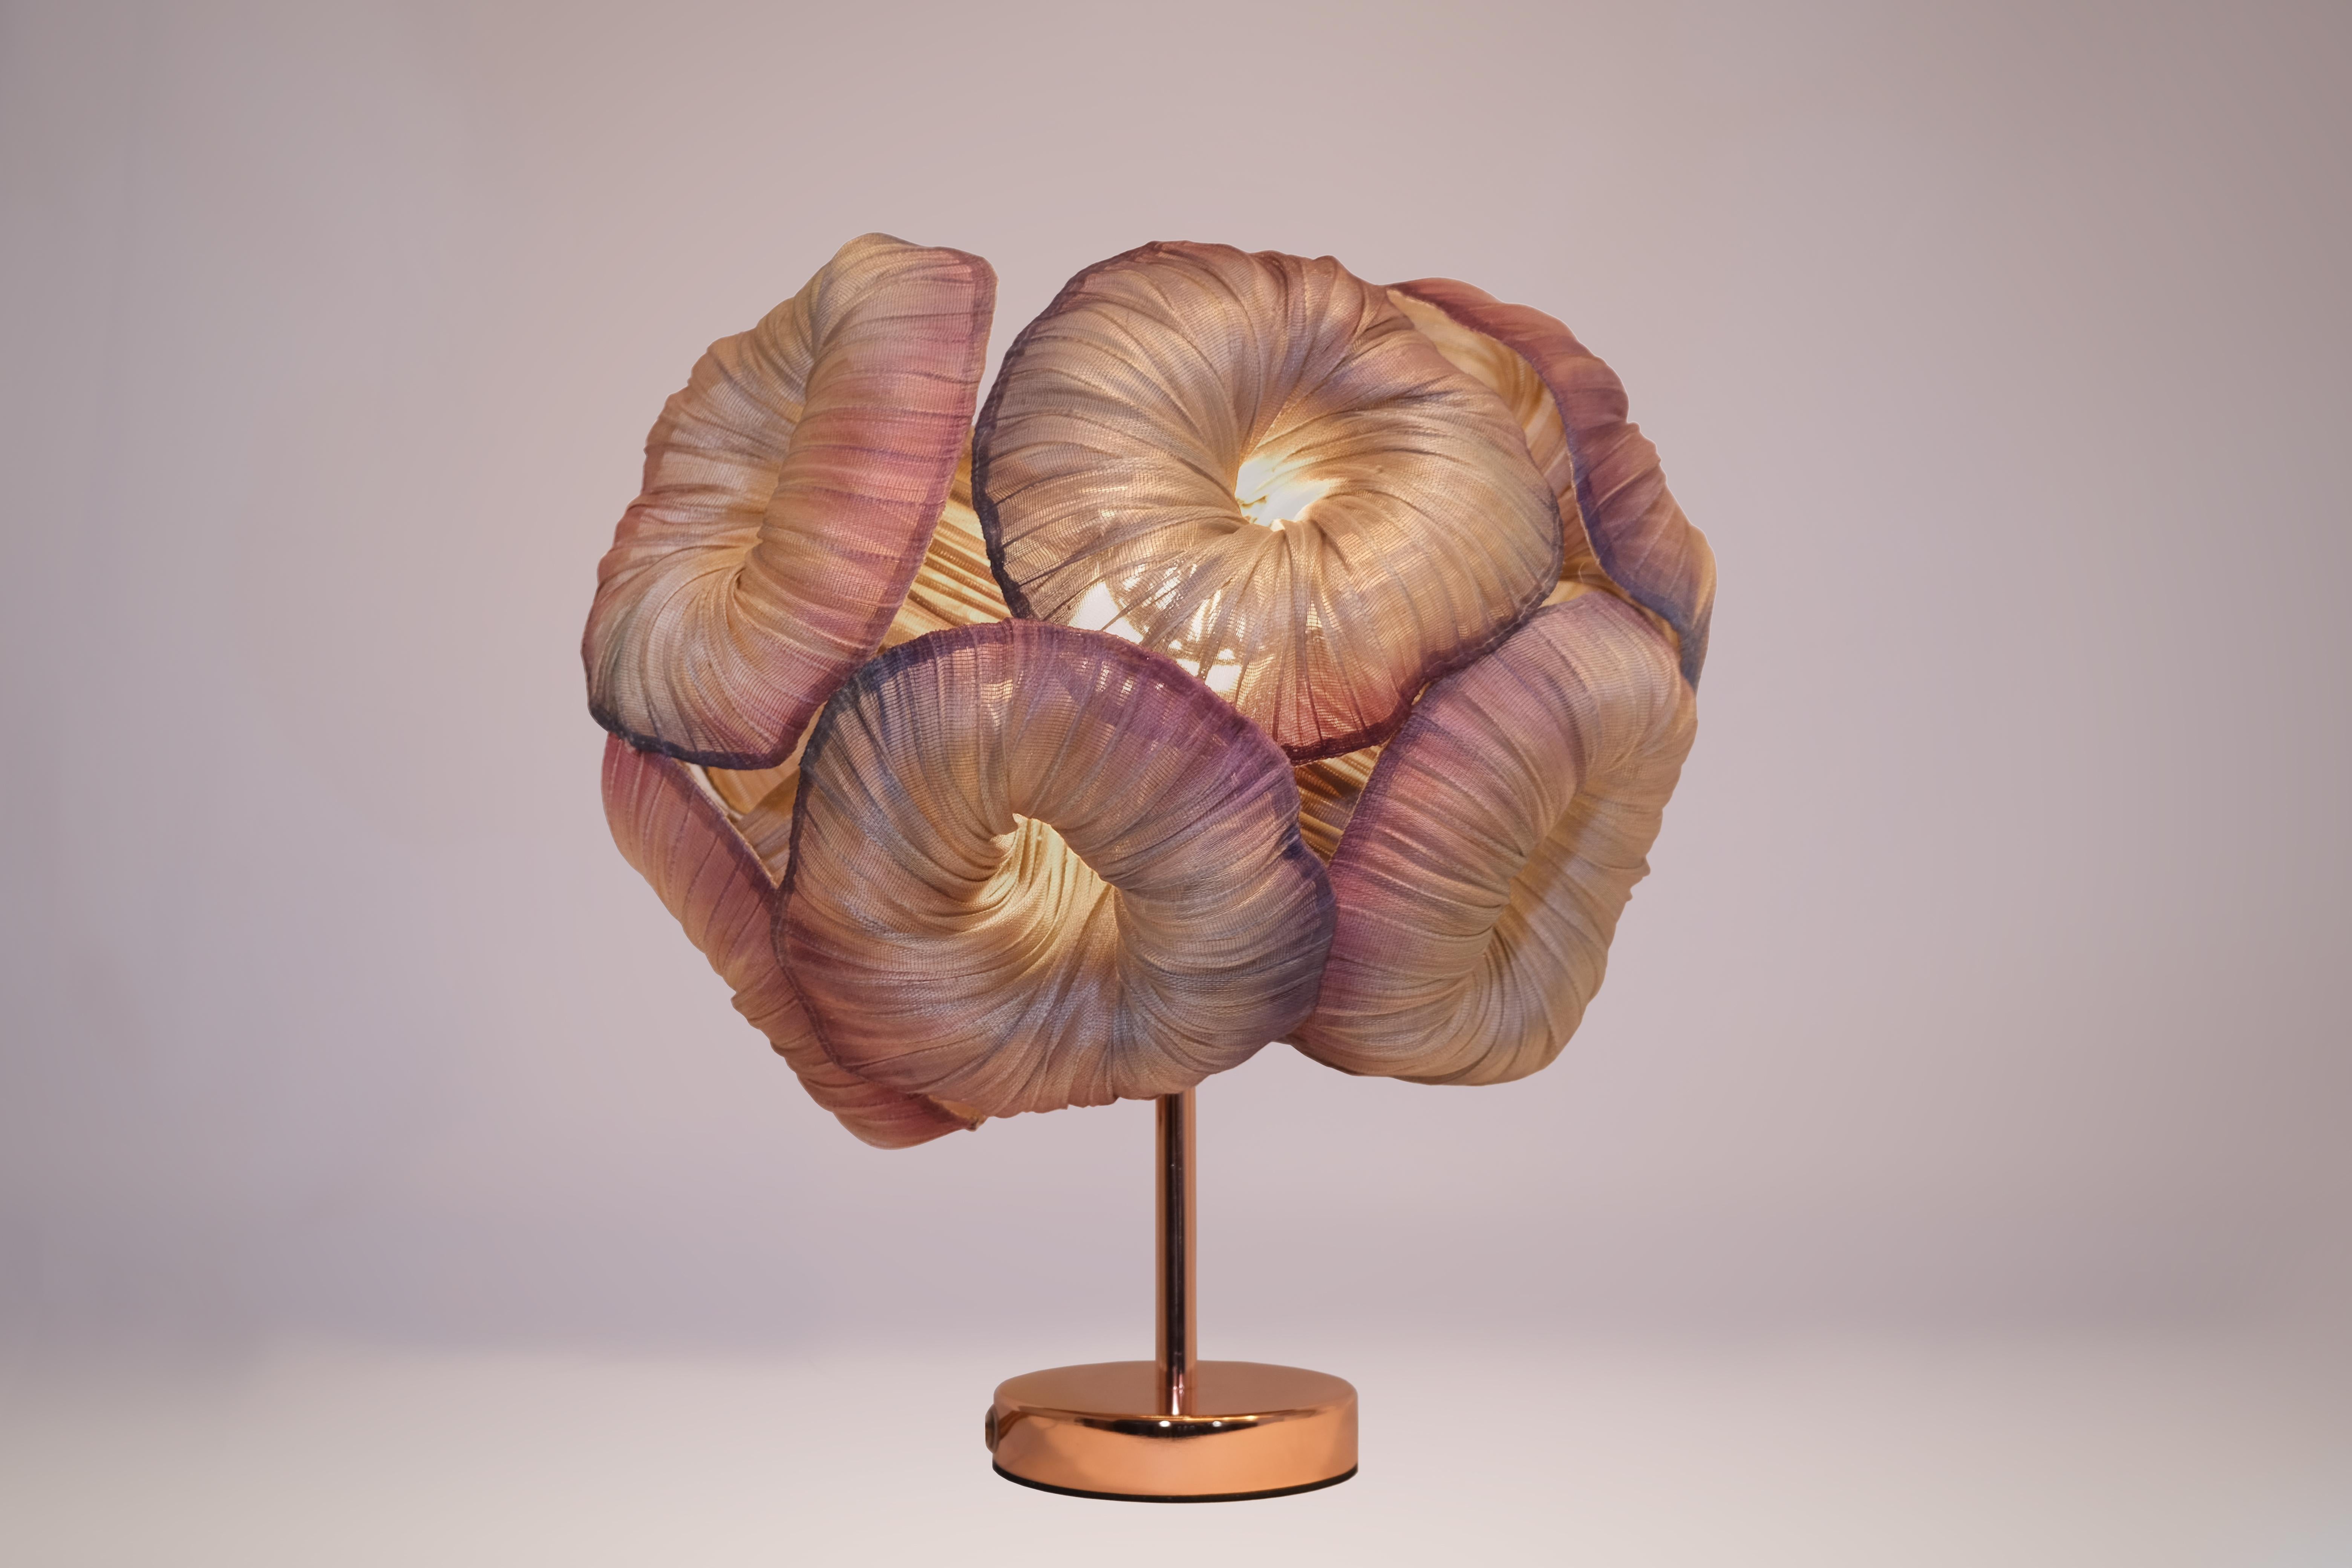 The Anemone table lamp. Named for the soft, brightly colored sea creatures that look like a flower and often live on rocks under water. A little mermaid’s best friend, the Anemone Lamp is inspired by sea corals to brighten up your life. 

This piece